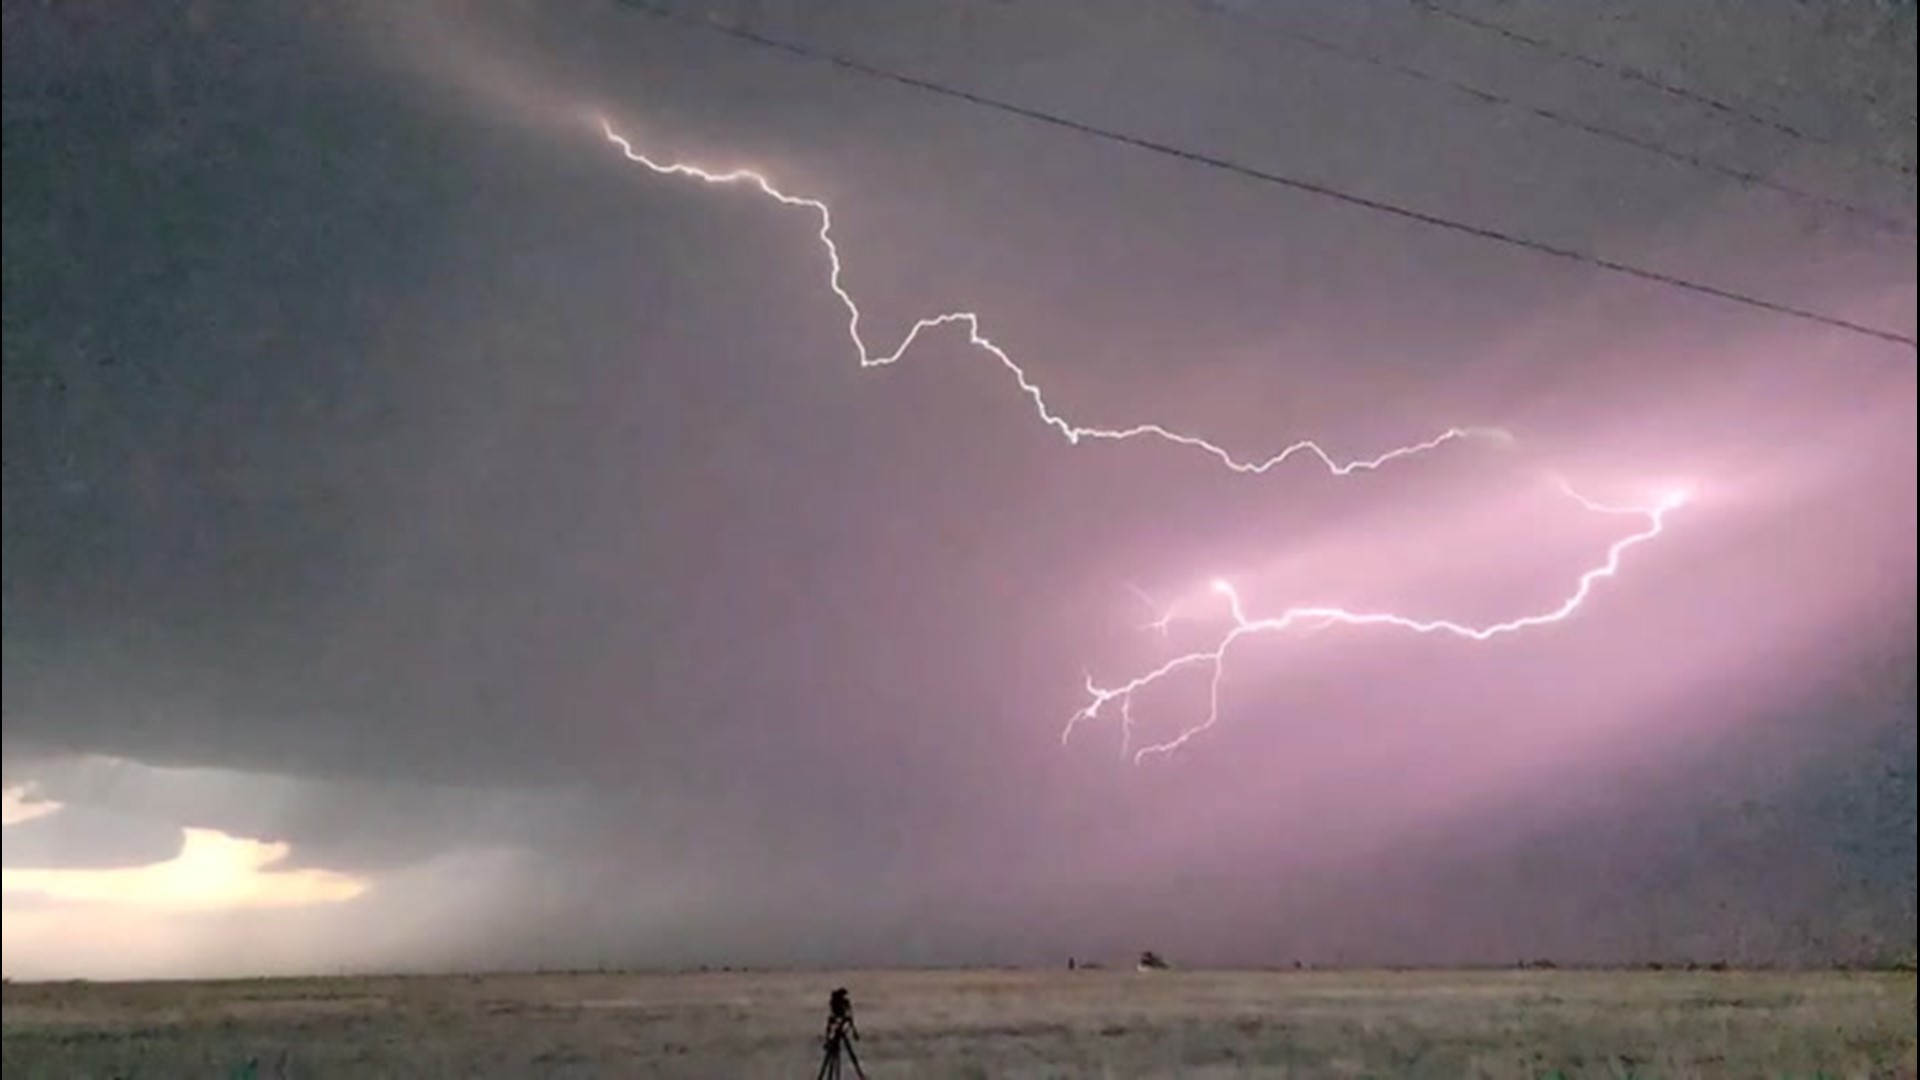 Some areas of the country received rain, hail and winds reaching 70 mph on Mother's Day.